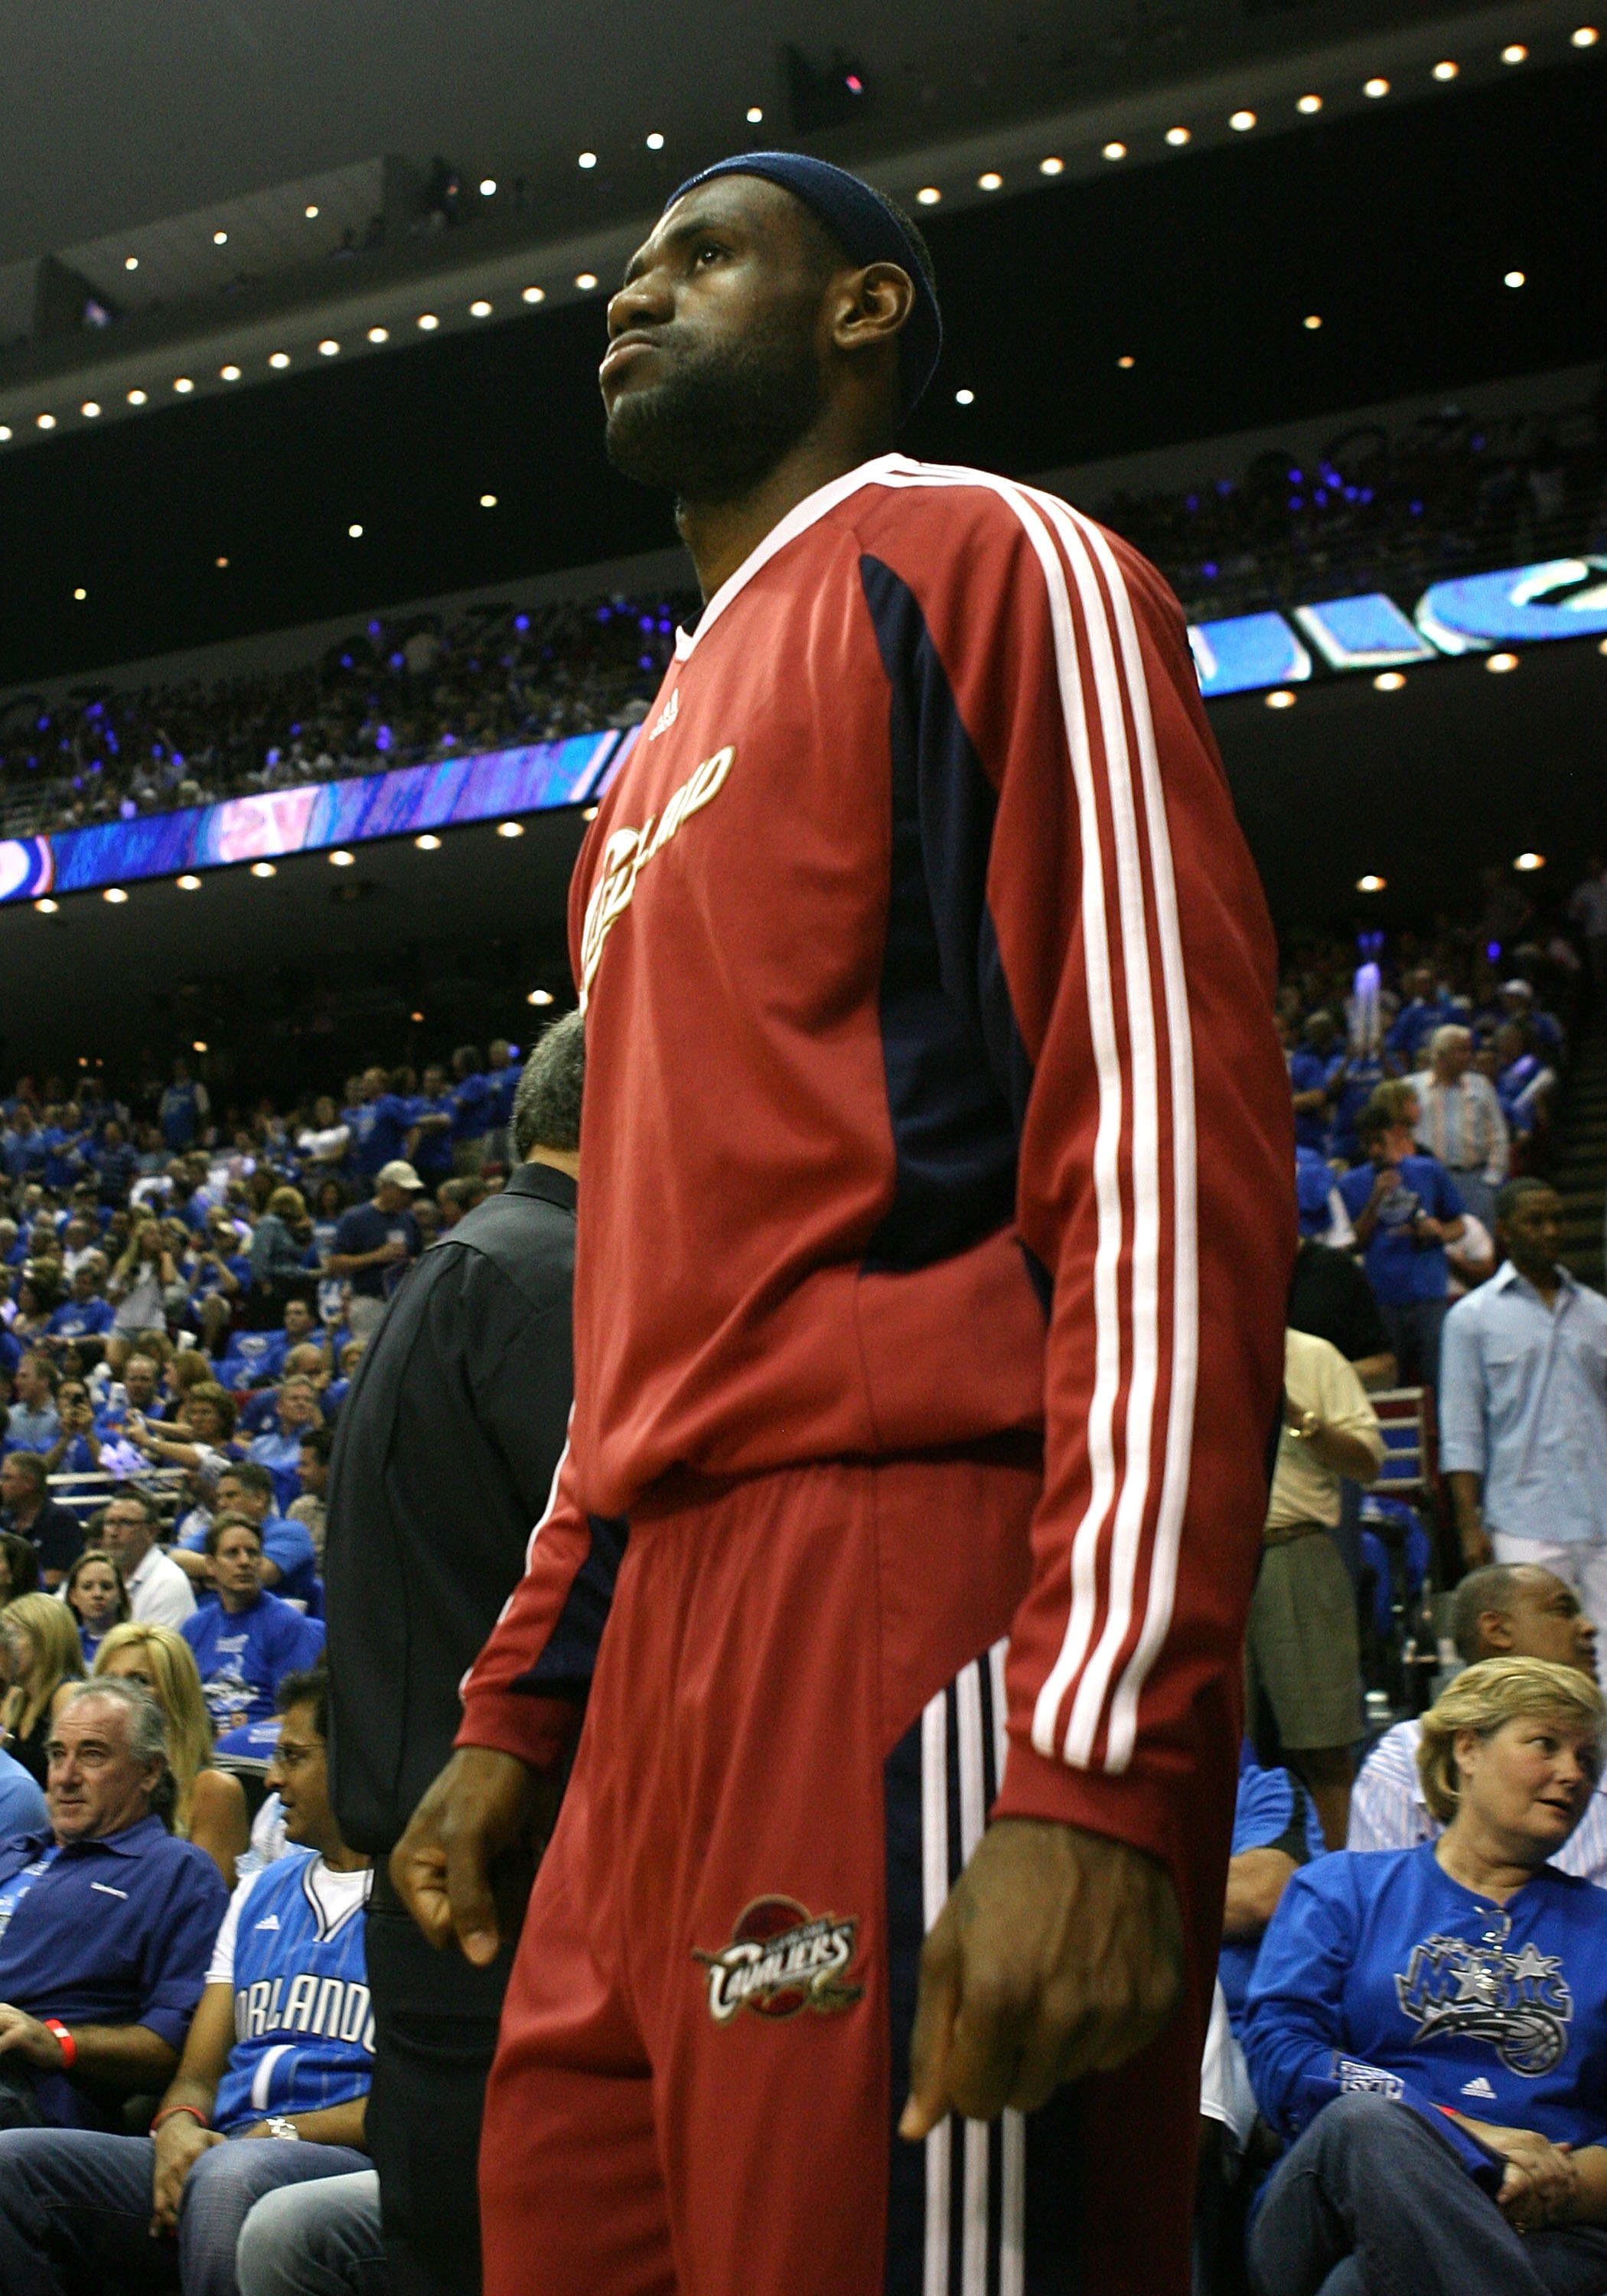 ORLANDO, FL - MAY 30: LeBron James #23 of the Cleveland Cavaliers looks on during introductions against the Orlando Magic in Game Six of the Eastern Conference Finals during the 2009 Playoffs at Amway Arena on May 30, 2009 in Orlando, Florida. NOTE TO USE